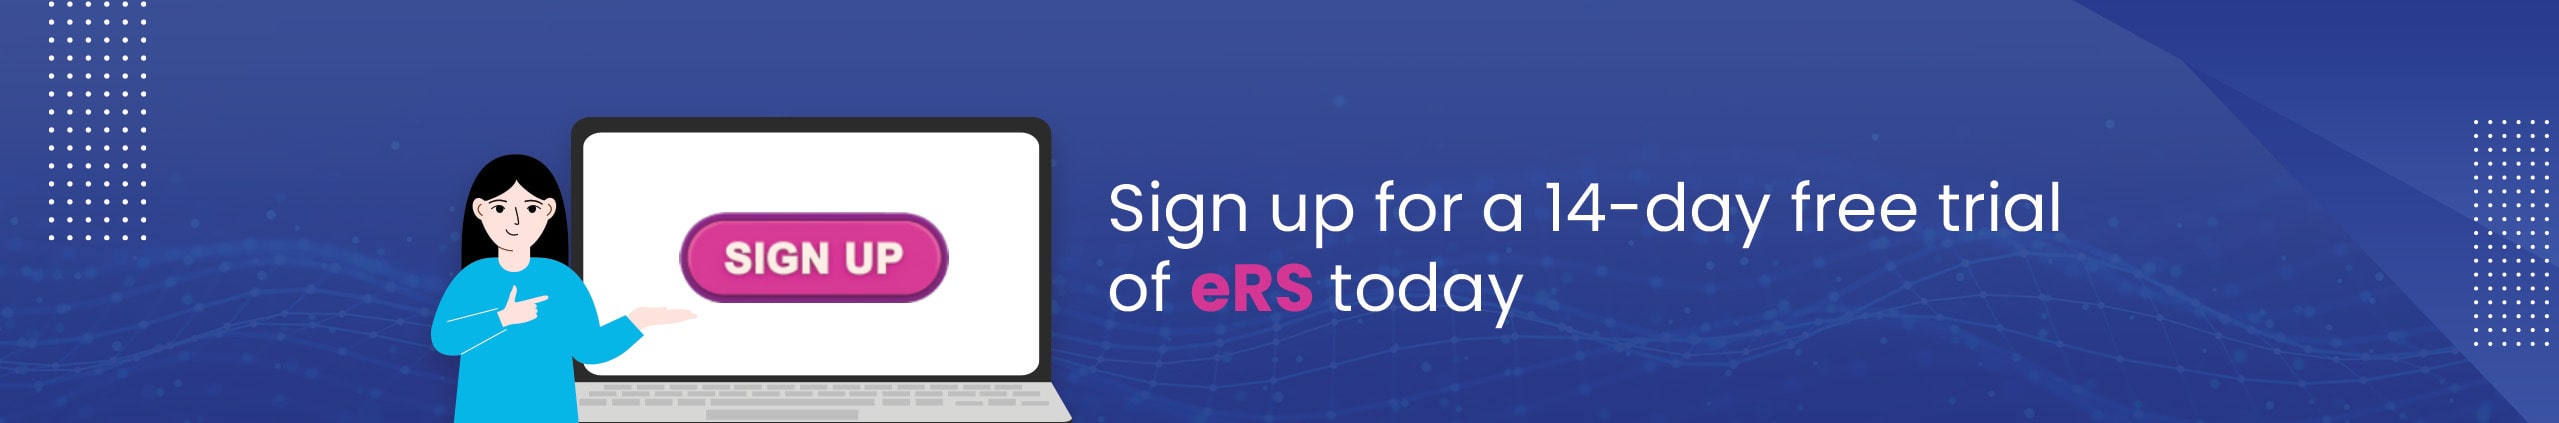 Sign up for a 14-day free trial of eRS today